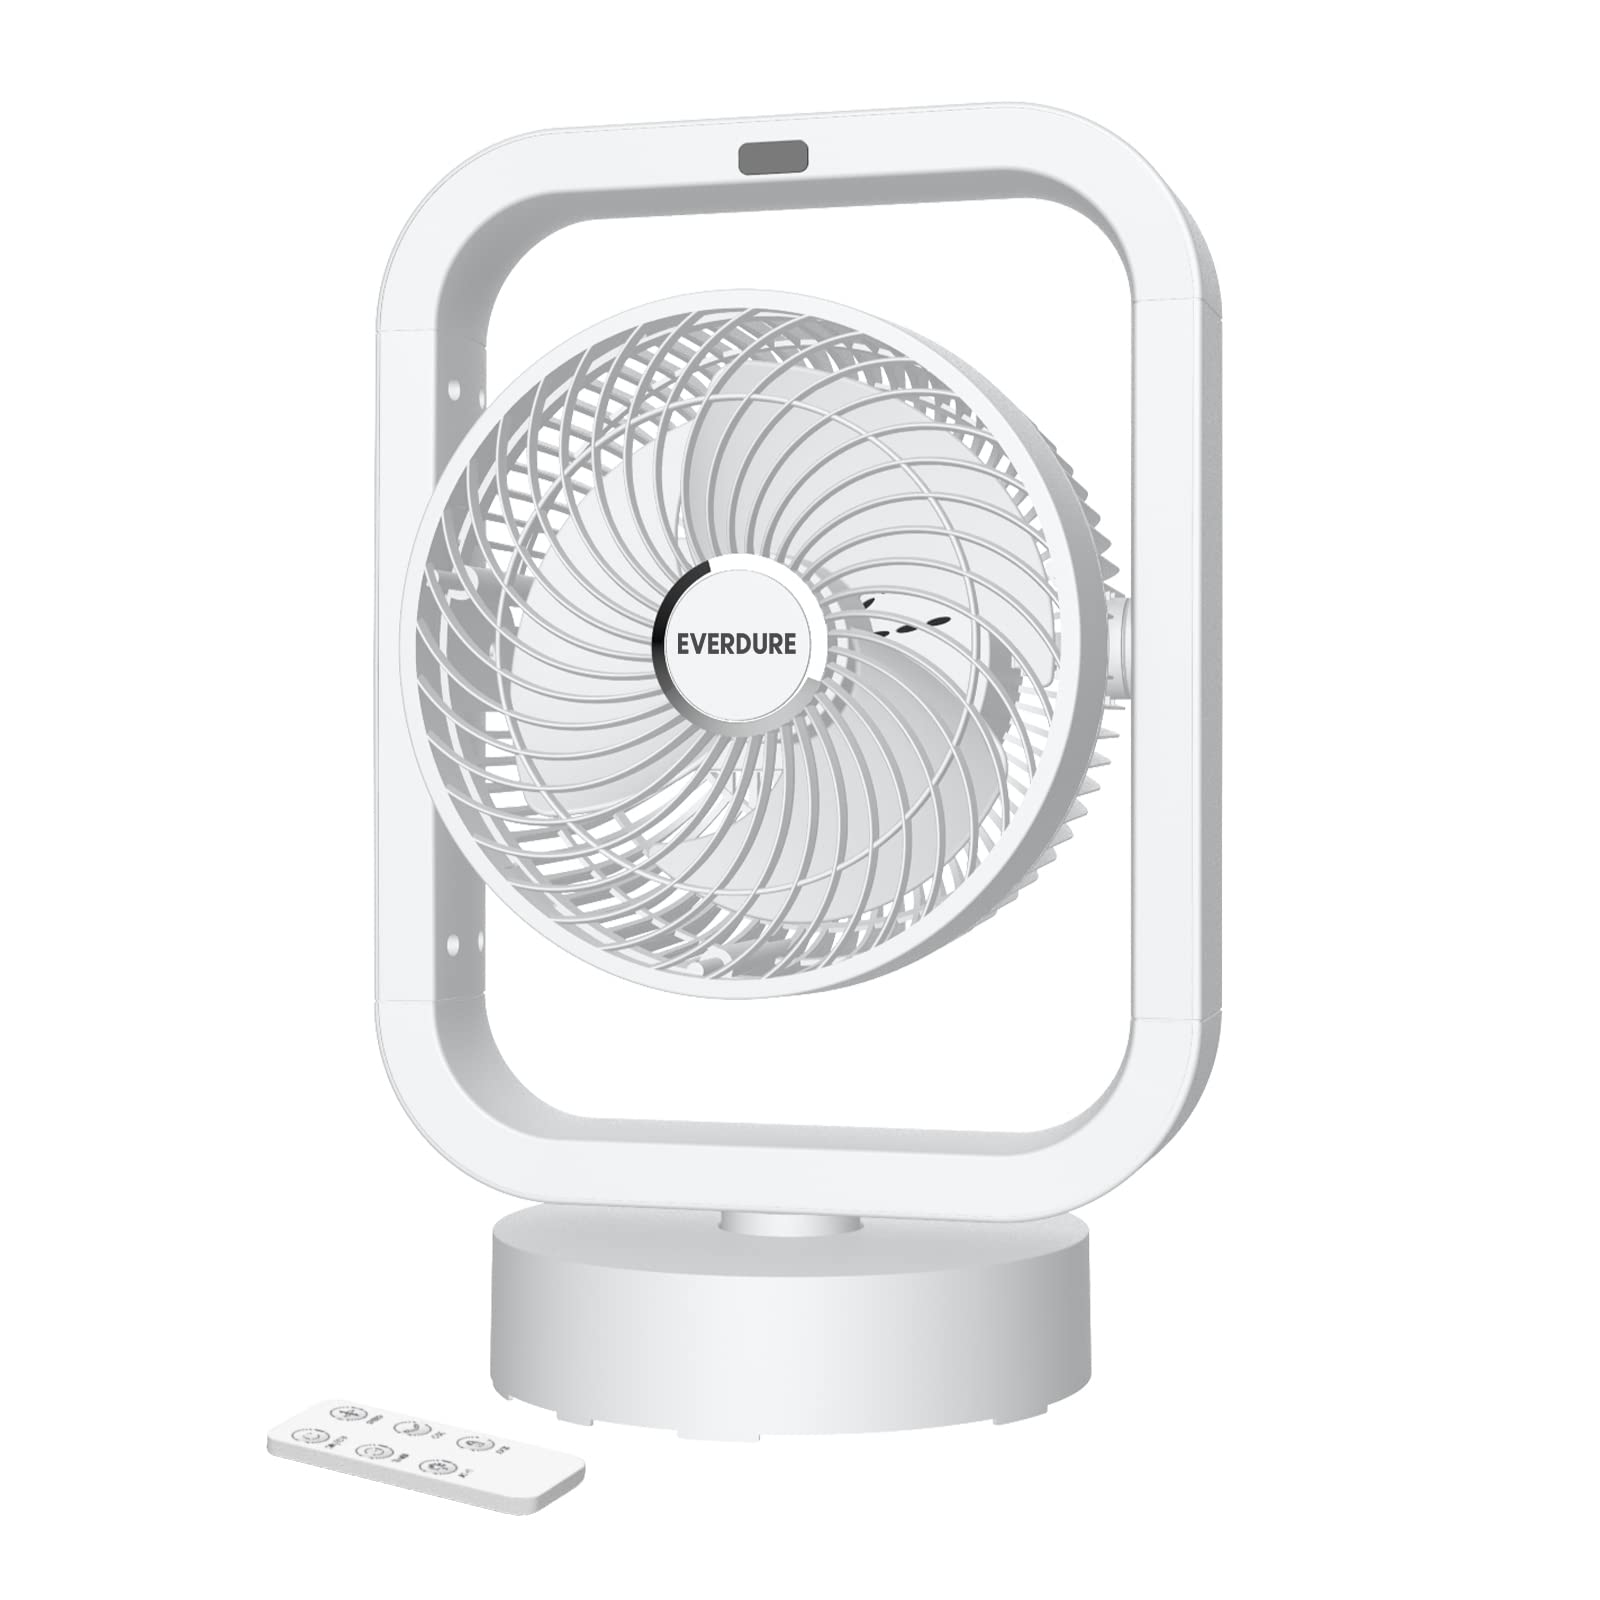 Everdure 10” Oscillating AC Floor, Desk or Table Fan, 4 Speed Settings, Targeted Airflow Control, Remote Control Included, Portable, Perfect for Bedroom, Living Room, Home Office, White